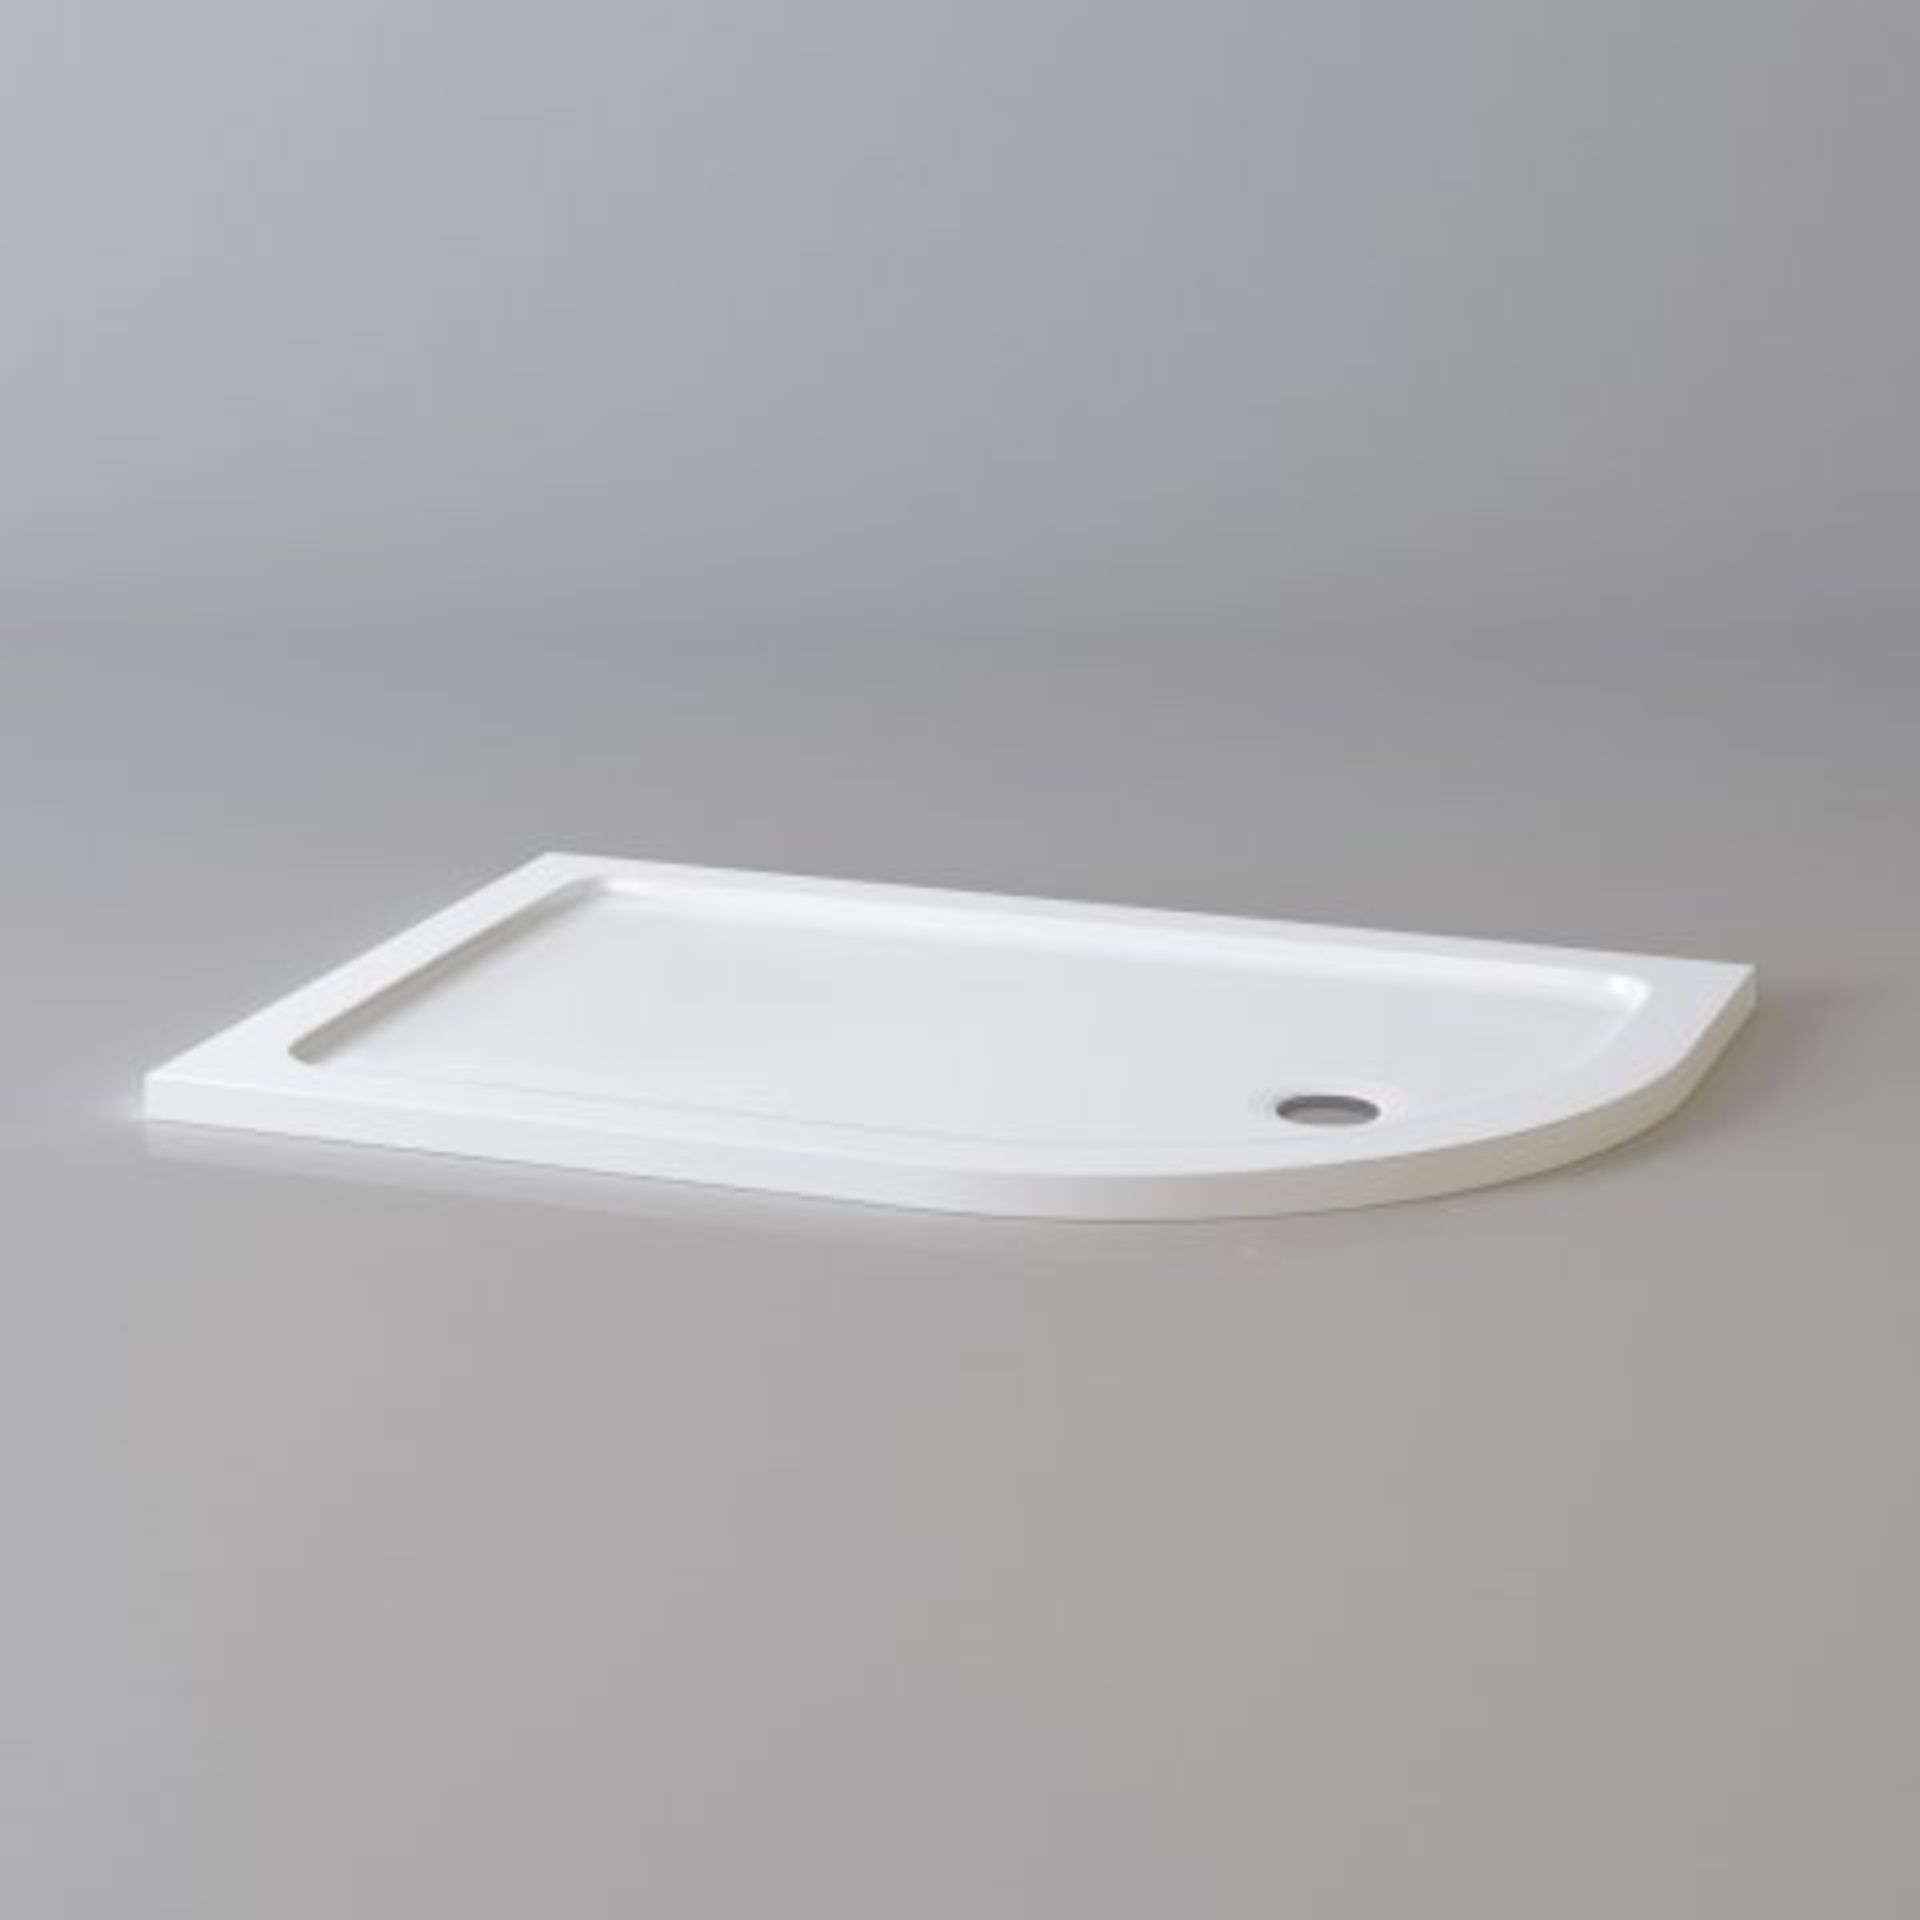 (P274) 1200x800mm Offset Quadrant Ultraslim Stone Shower Tray - Right. RRP £299.99. Magnificently